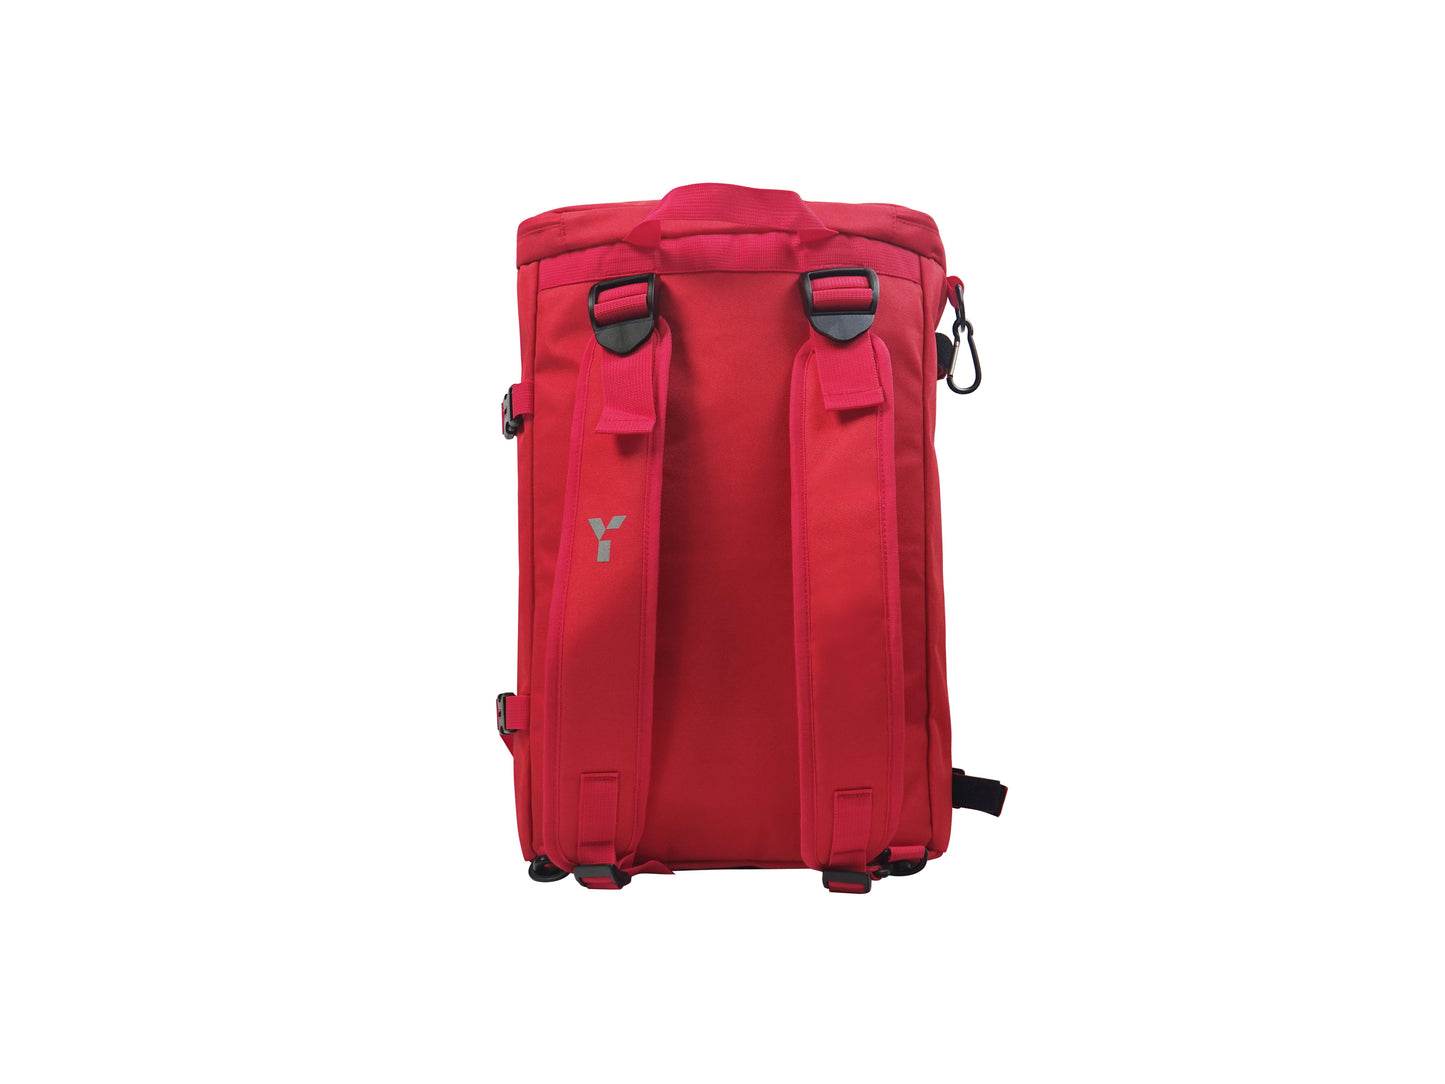 Accra Backpack - Red